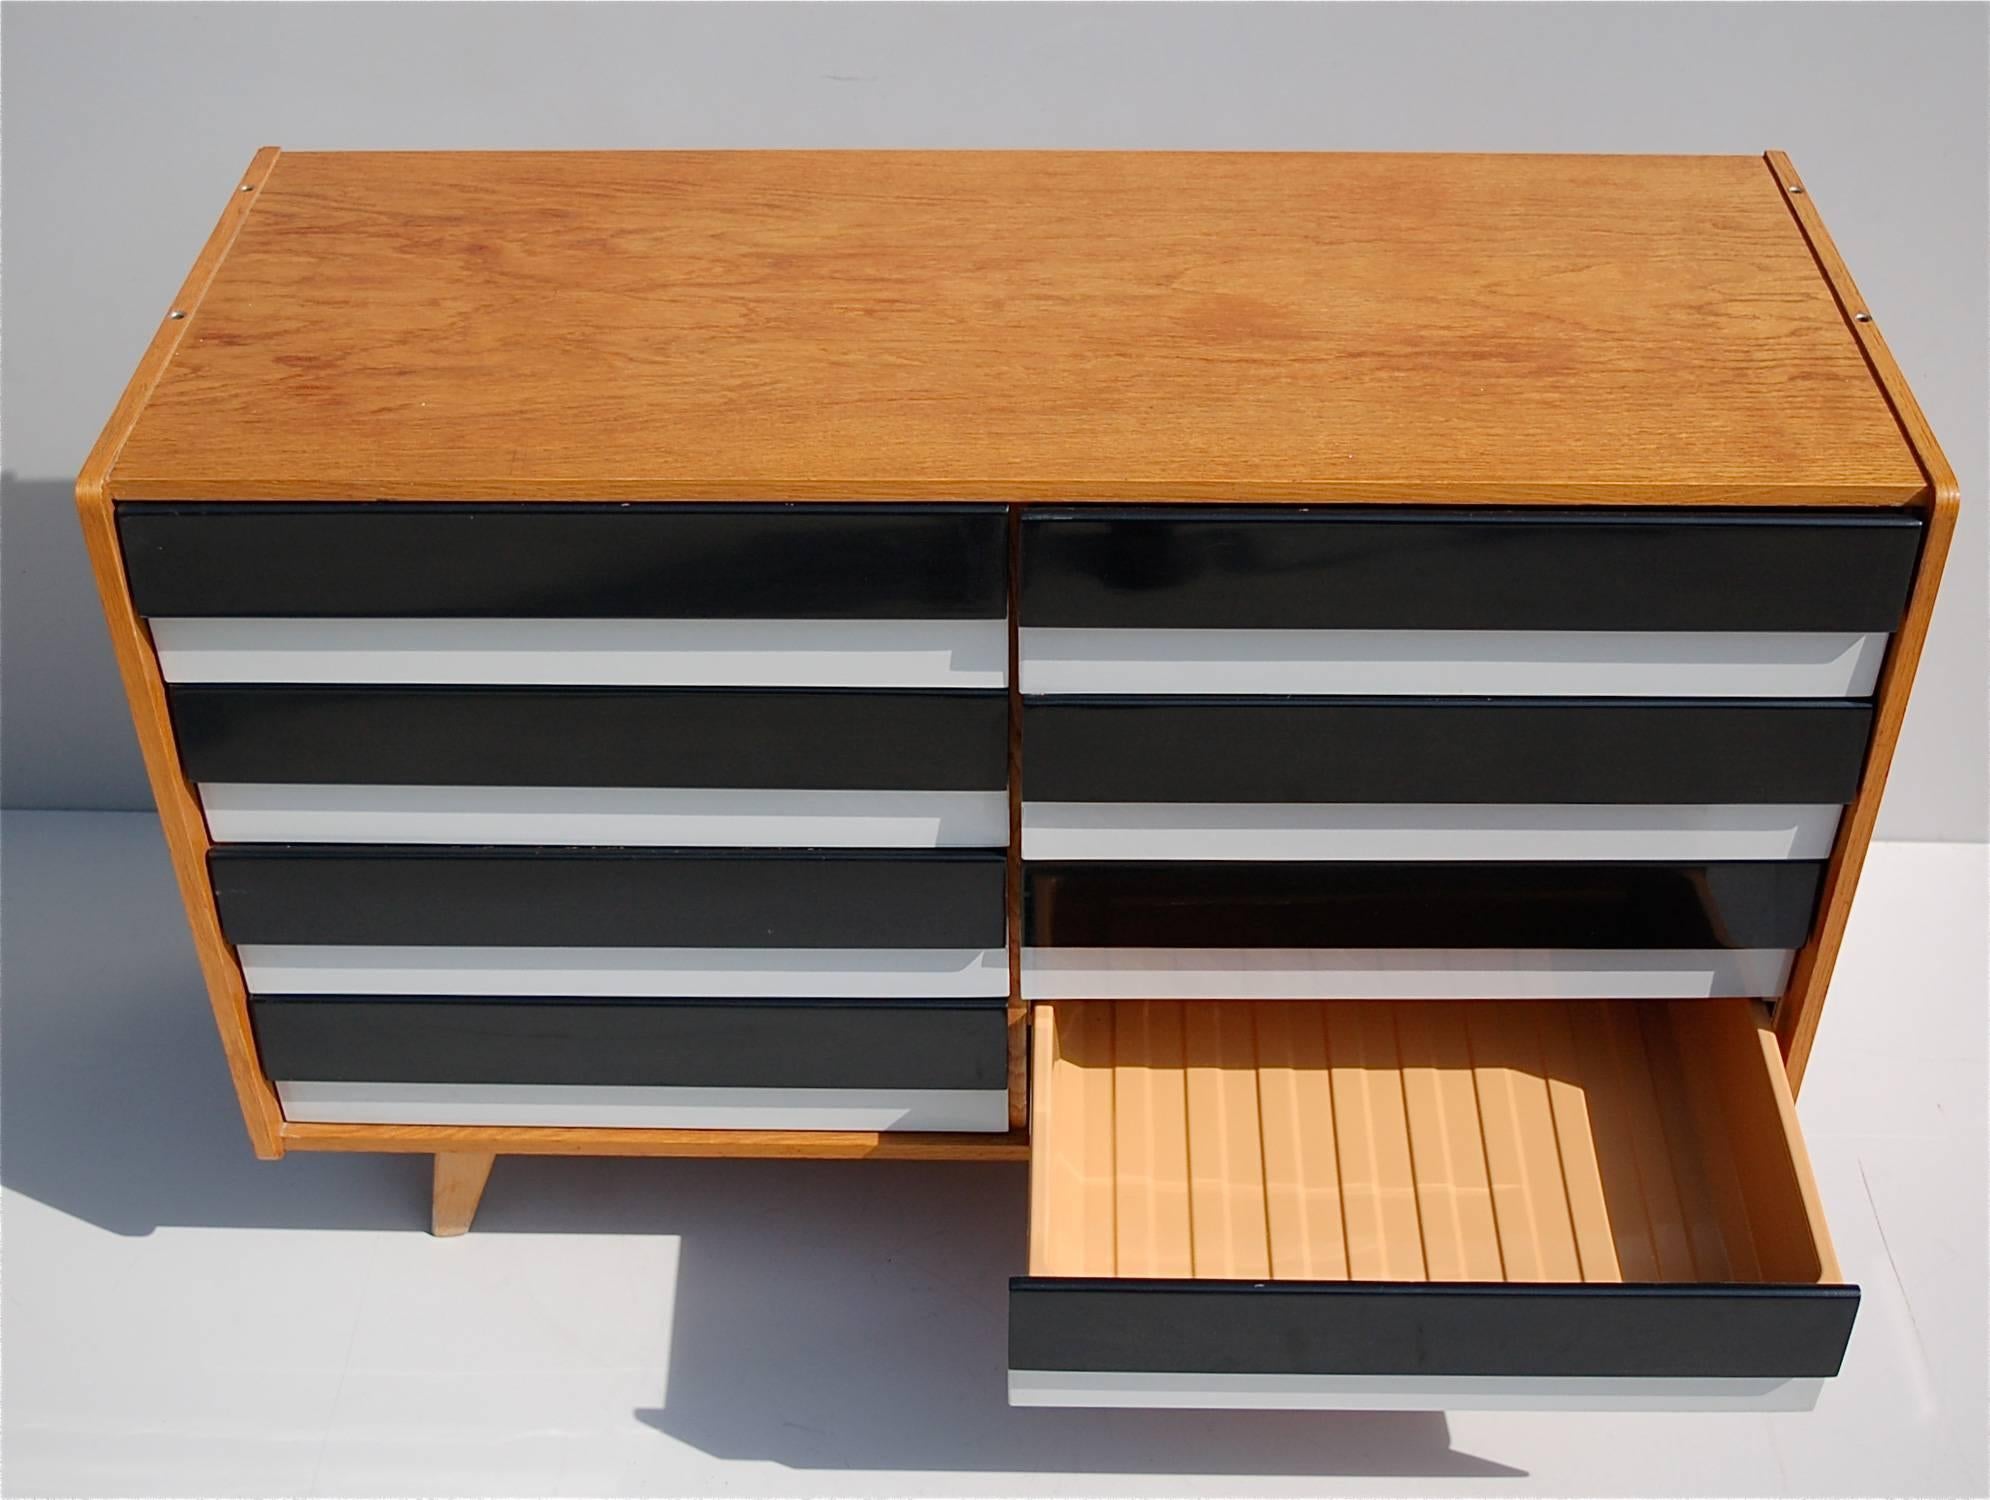 A striking chest of drawers with a light wooden frame, designed by Jiri Jiroutek for Interier Praha in the 1960s. The main body is made from solid wood, resting on tapered legs with eight black and white lacquered drawers. Each drawer front has a